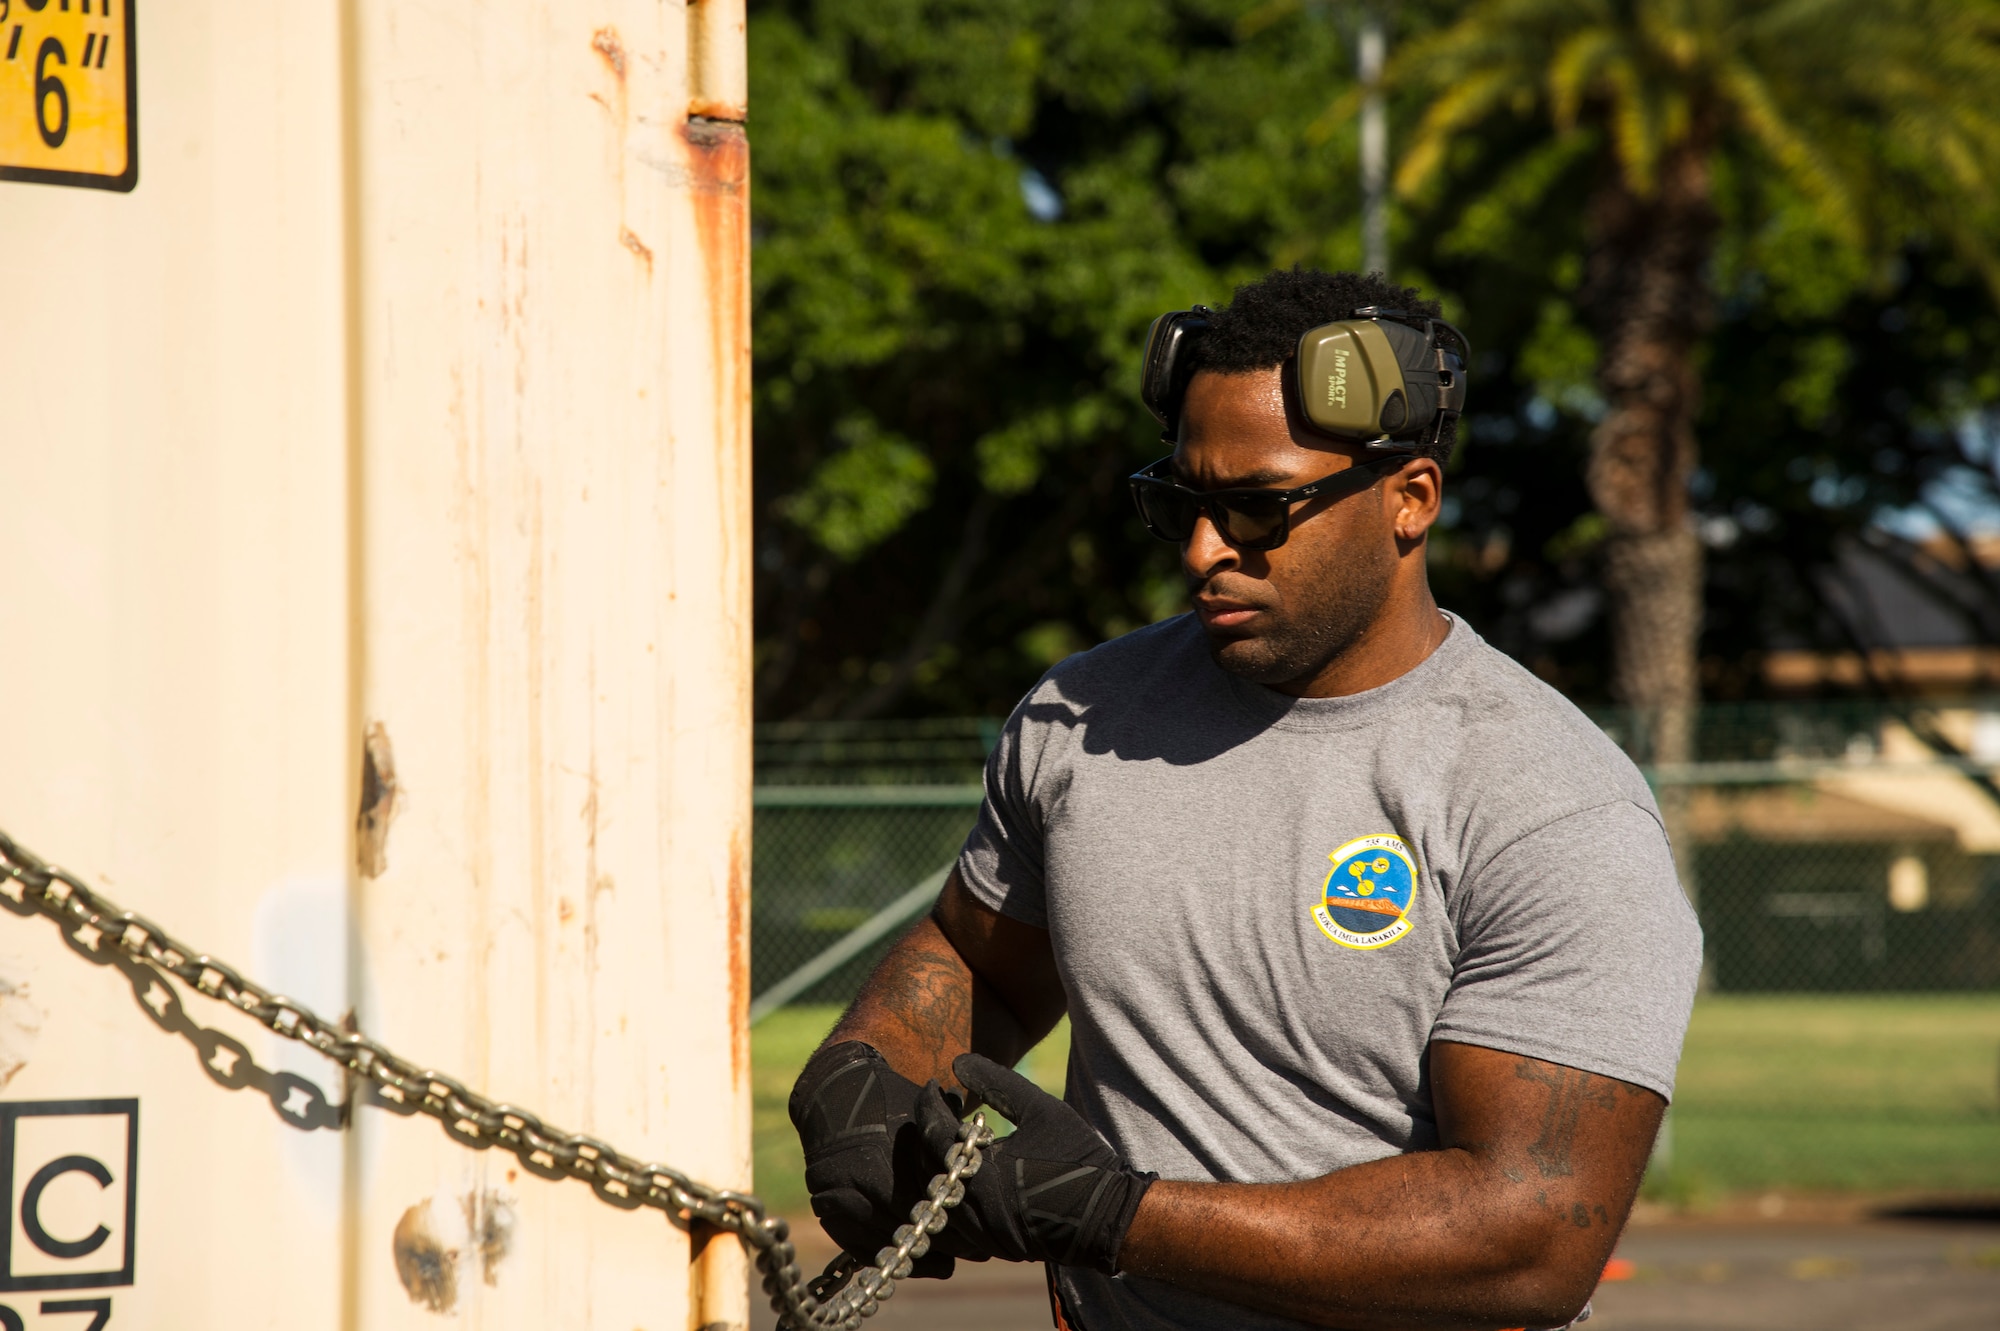 Staff Sgt. Byron Patrick, 735th Air Mobility Squadron reserve coordinator, secures a shipping container for the pallet build-up competition during the Hickam Port Dawg Challenge, at Joint Base Pearl Harbor-Hickam, Hawaii, Nov. 17, 2017. The aerial port community hosts a Port Dawg Challenge every year to promote professionalism, and demonstrate air and space expeditionary force capabilities. (U.S. Air Force photo by Tech. Sgt. Heather Redman)